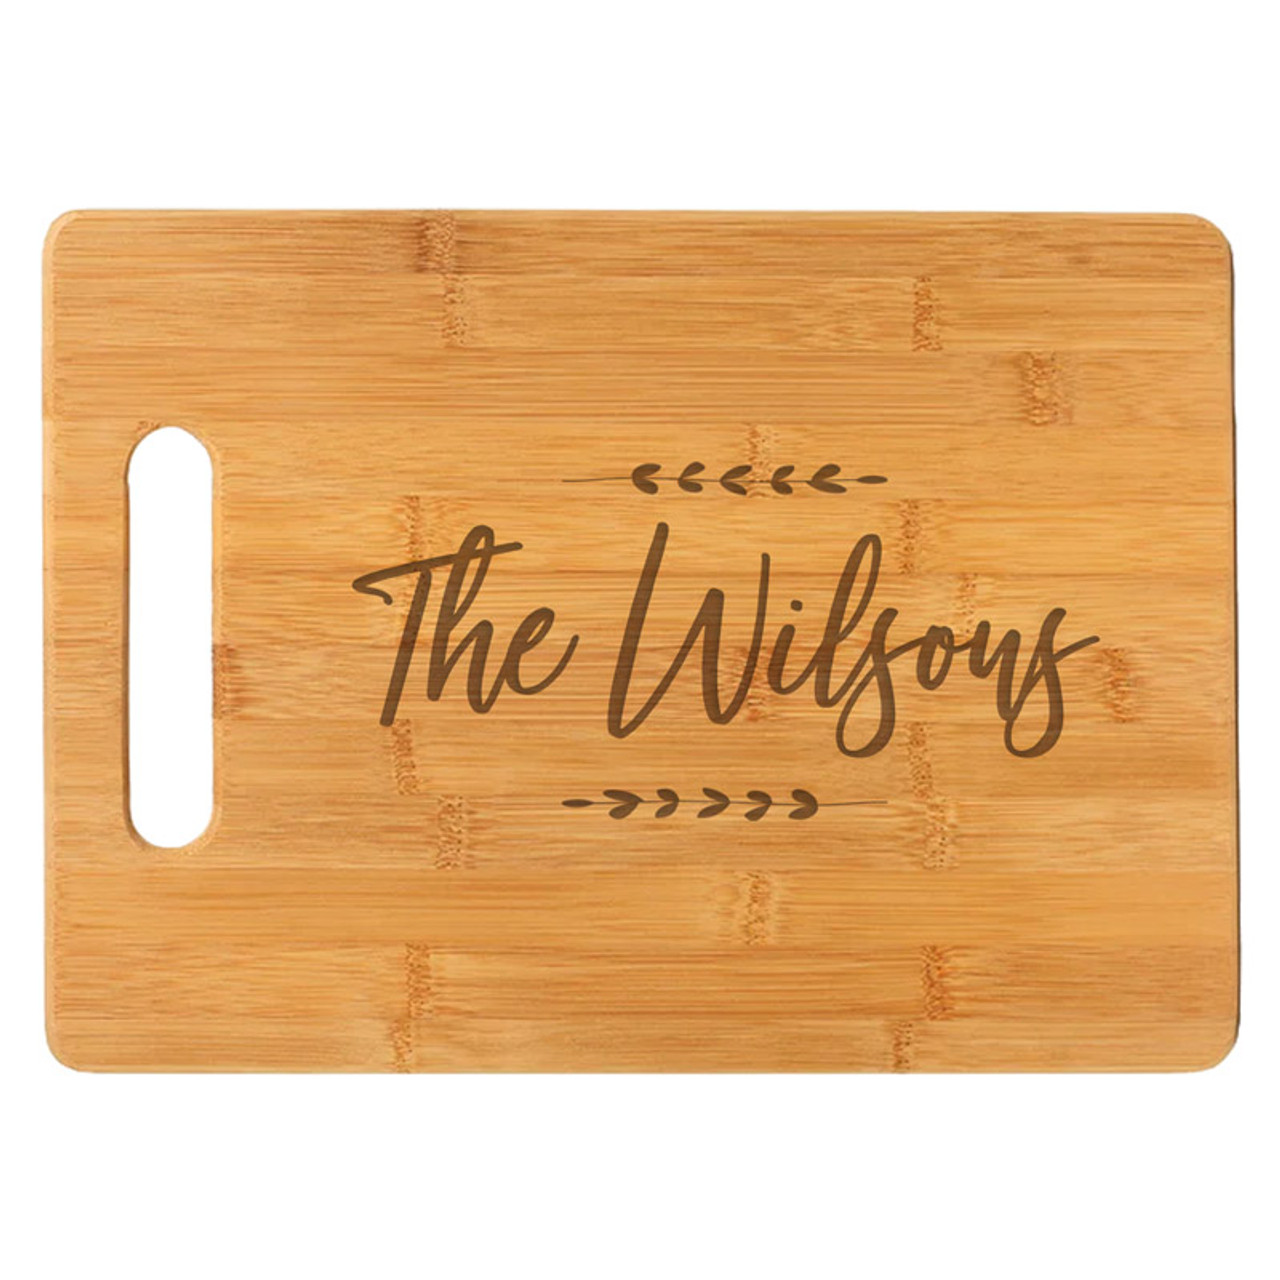 https://cdn11.bigcommerce.com/s-d22a0/images/stencil/1280x1280/products/2249/12208/personalized-cutting-board-family-name-leaves-CTB416__20103.1656375071.jpg?c=2